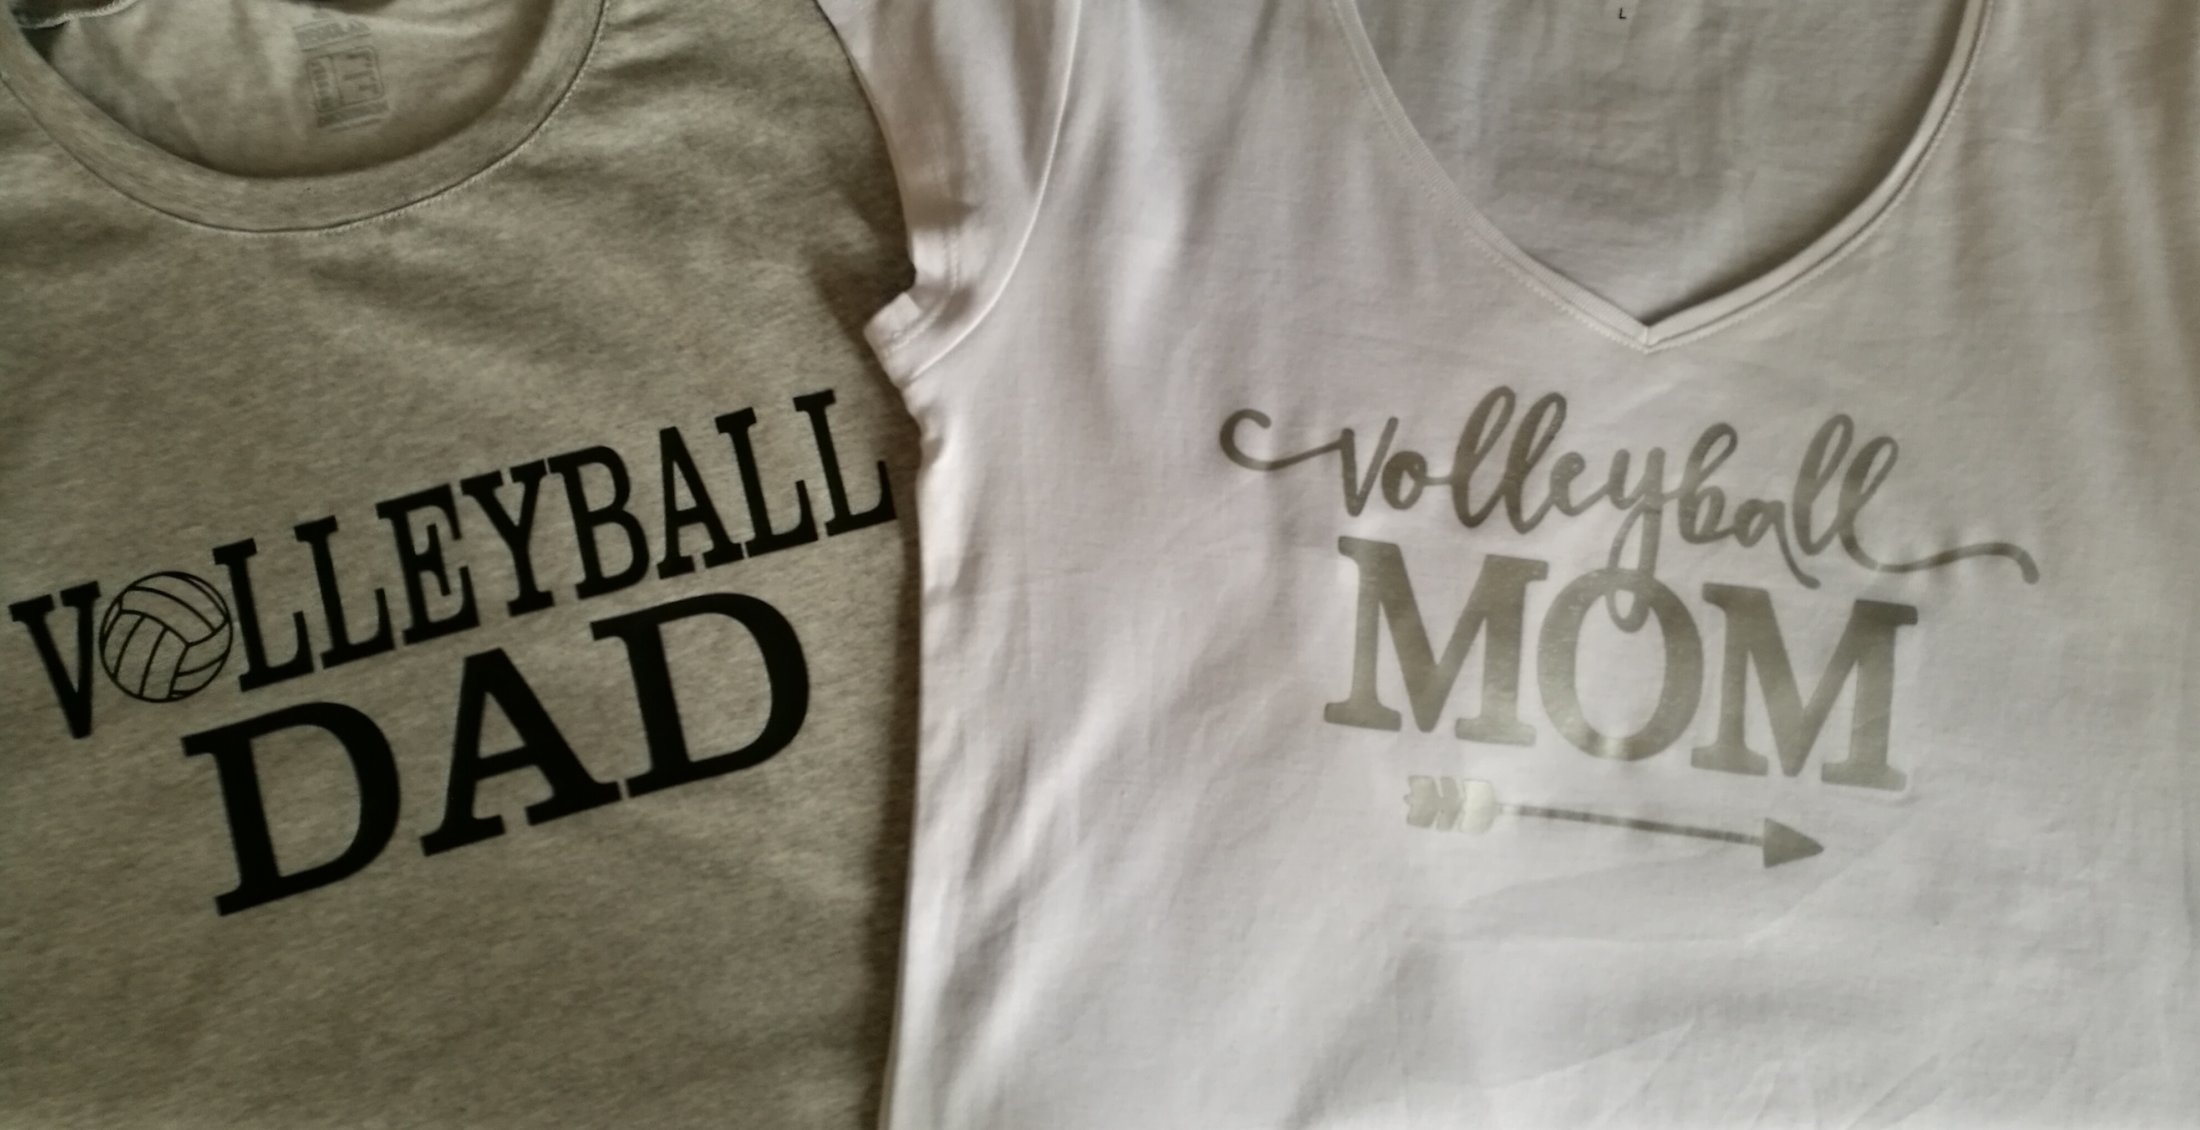 Volleyball Dad e Volleyball Mom